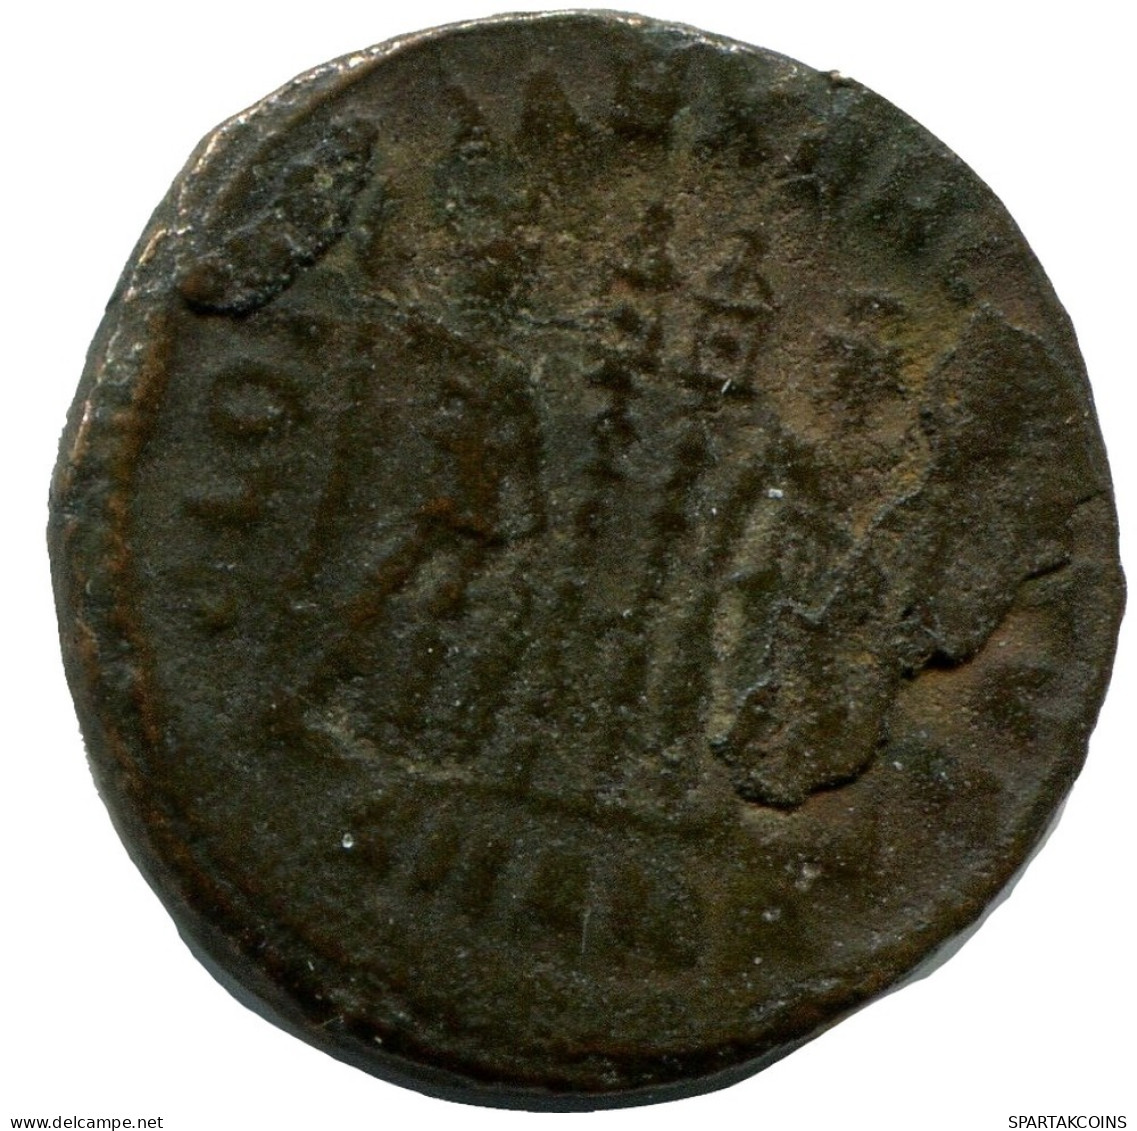 CONSTANTINE I MINTED IN ANTIOCH FOUND IN IHNASYAH HOARD EGYPT #ANC10623.14.D.A - The Christian Empire (307 AD Tot 363 AD)